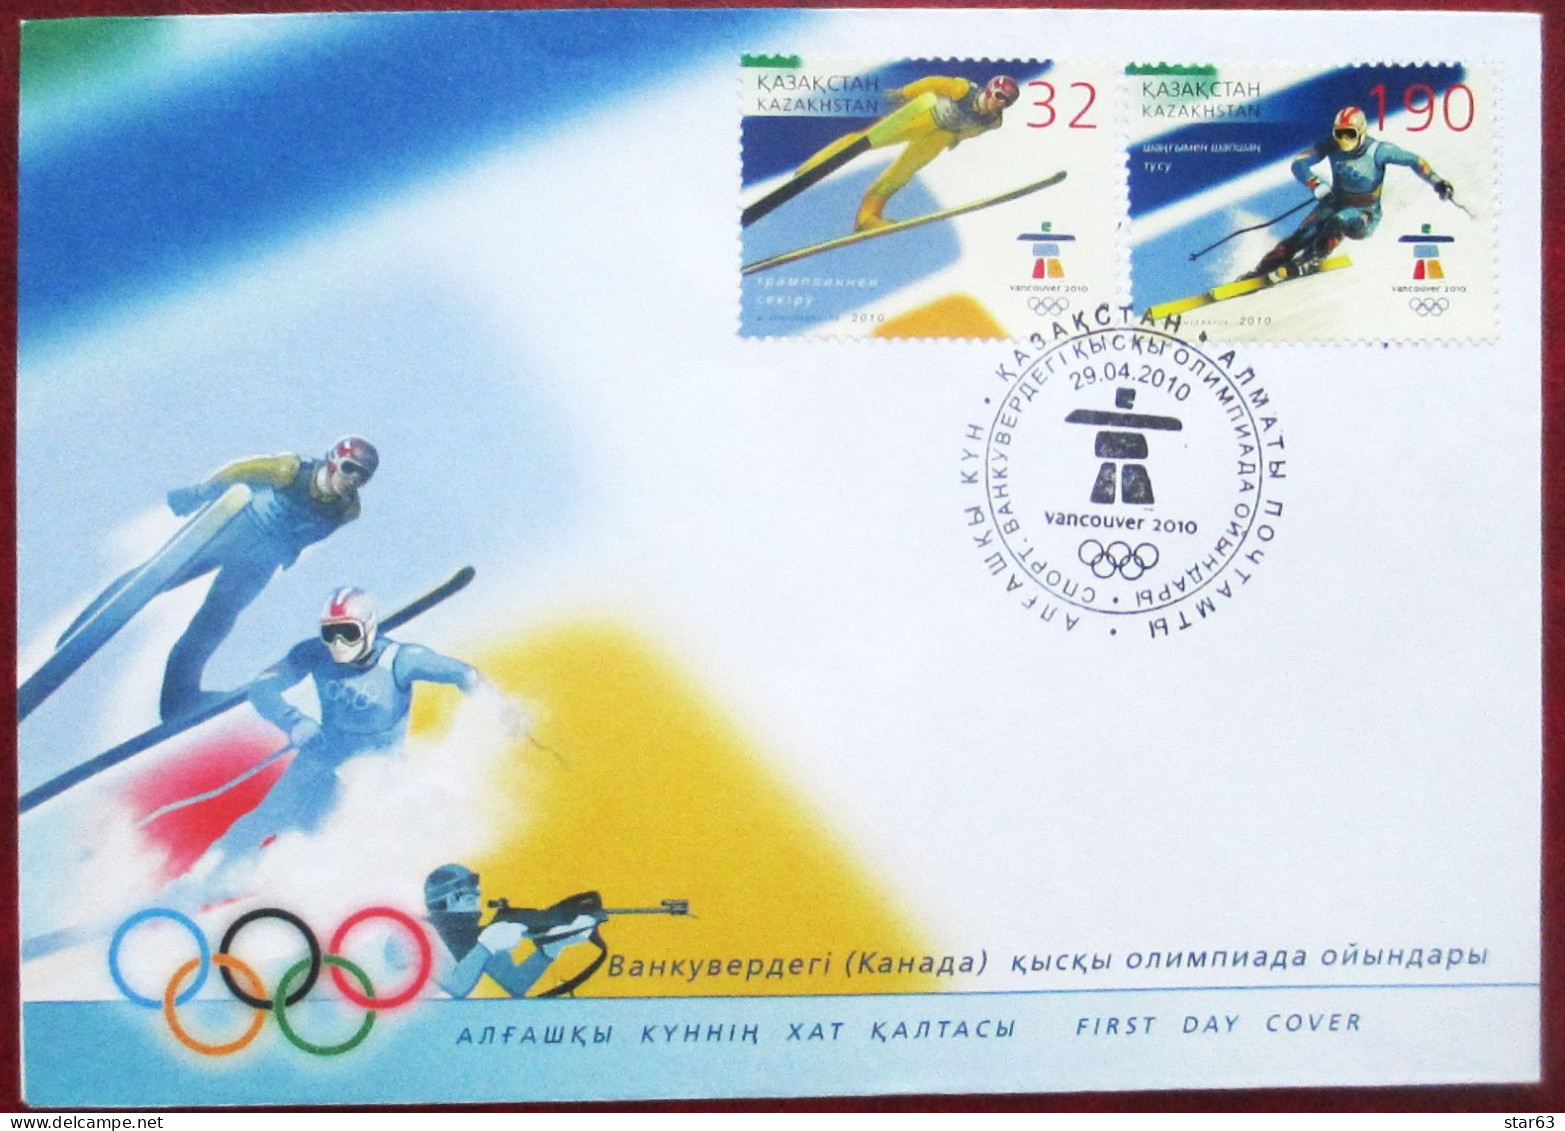 Kazakhstan  2010  Olympic  Games  - Vancouver  FDC - Inverno2010: Vancouver